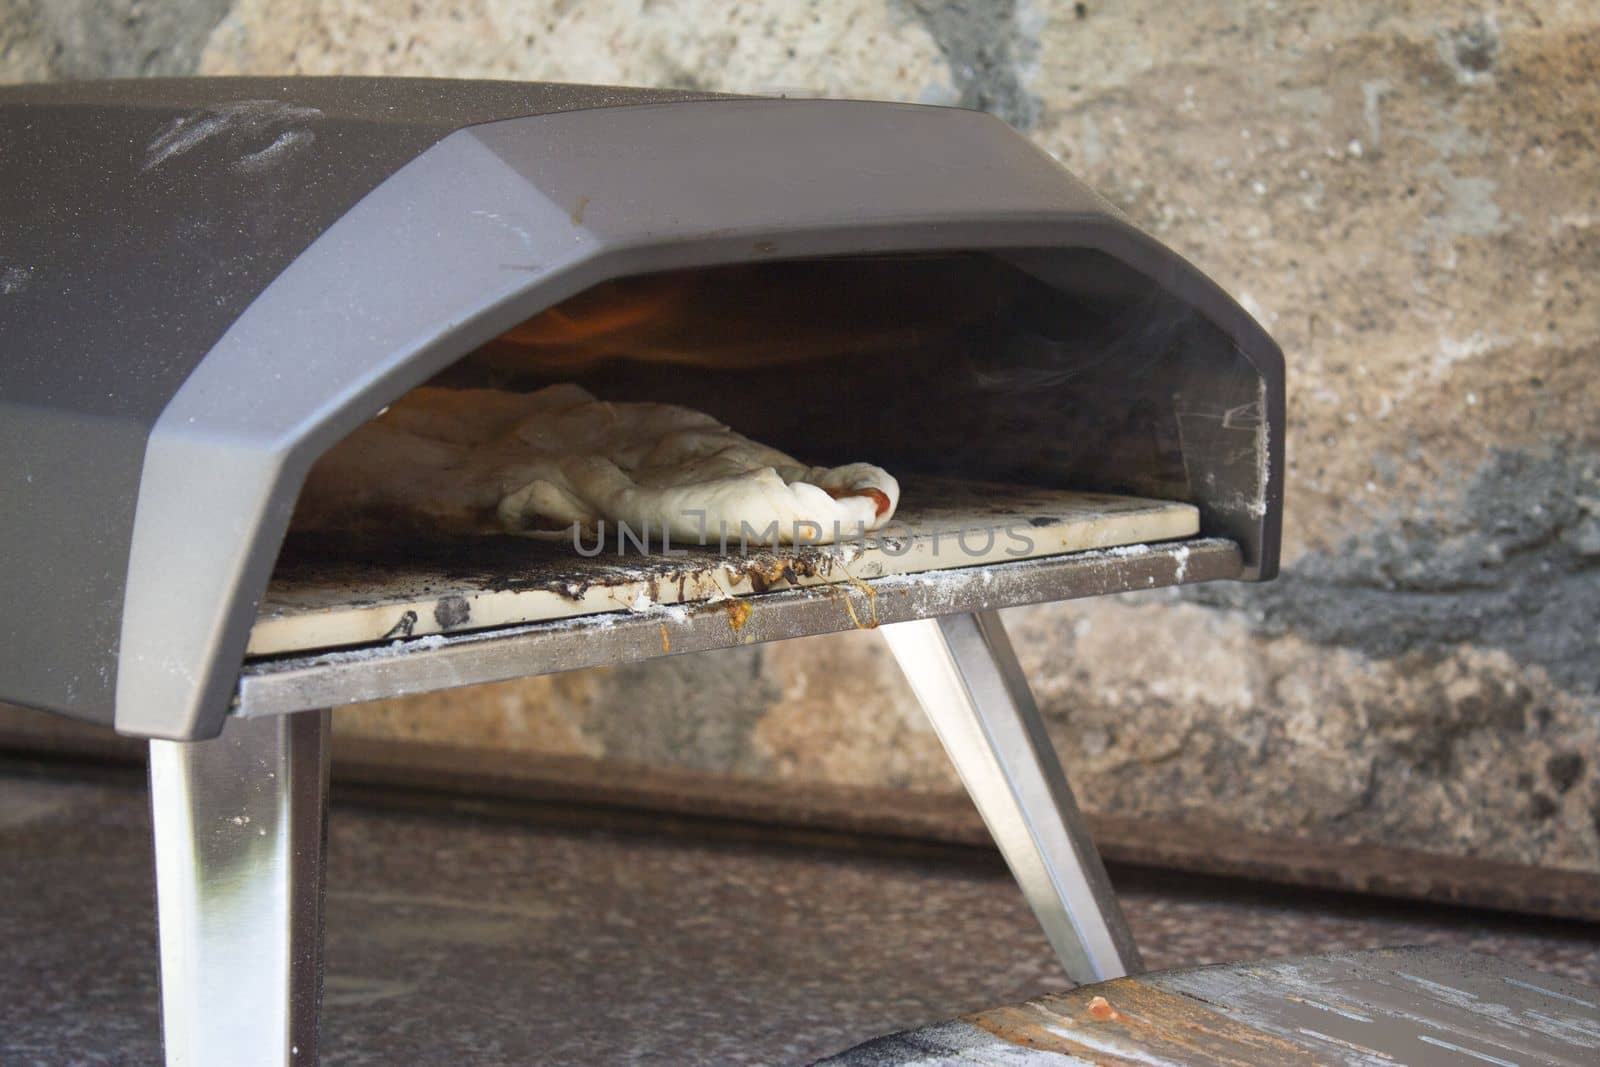 Small gas oven to make homemade pizzas. No people